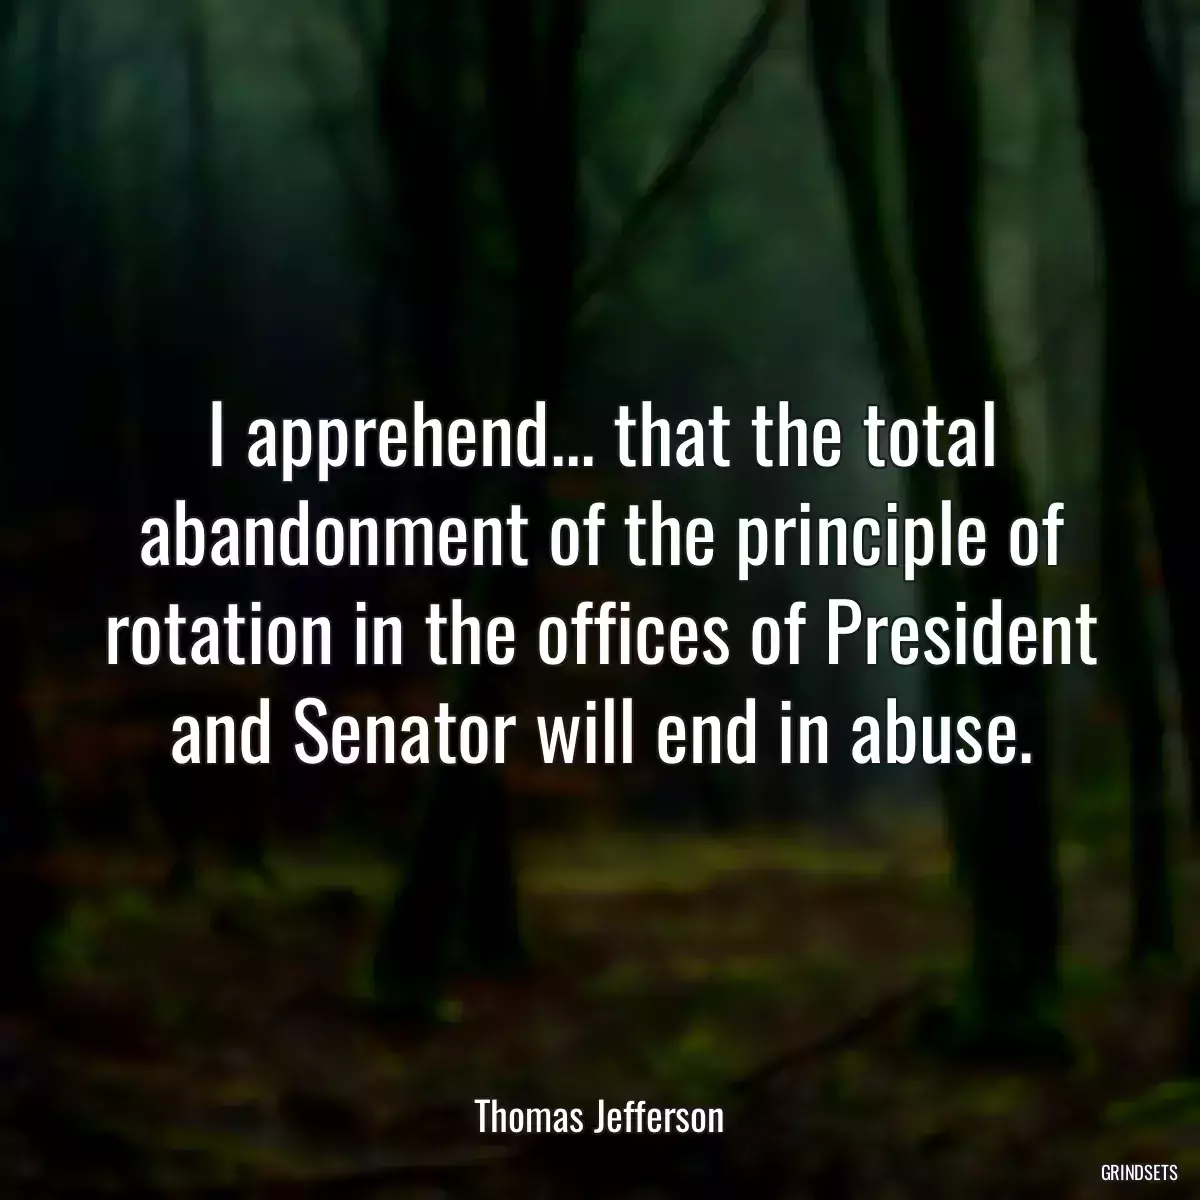 I apprehend... that the total abandonment of the principle of rotation in the offices of President and Senator will end in abuse.